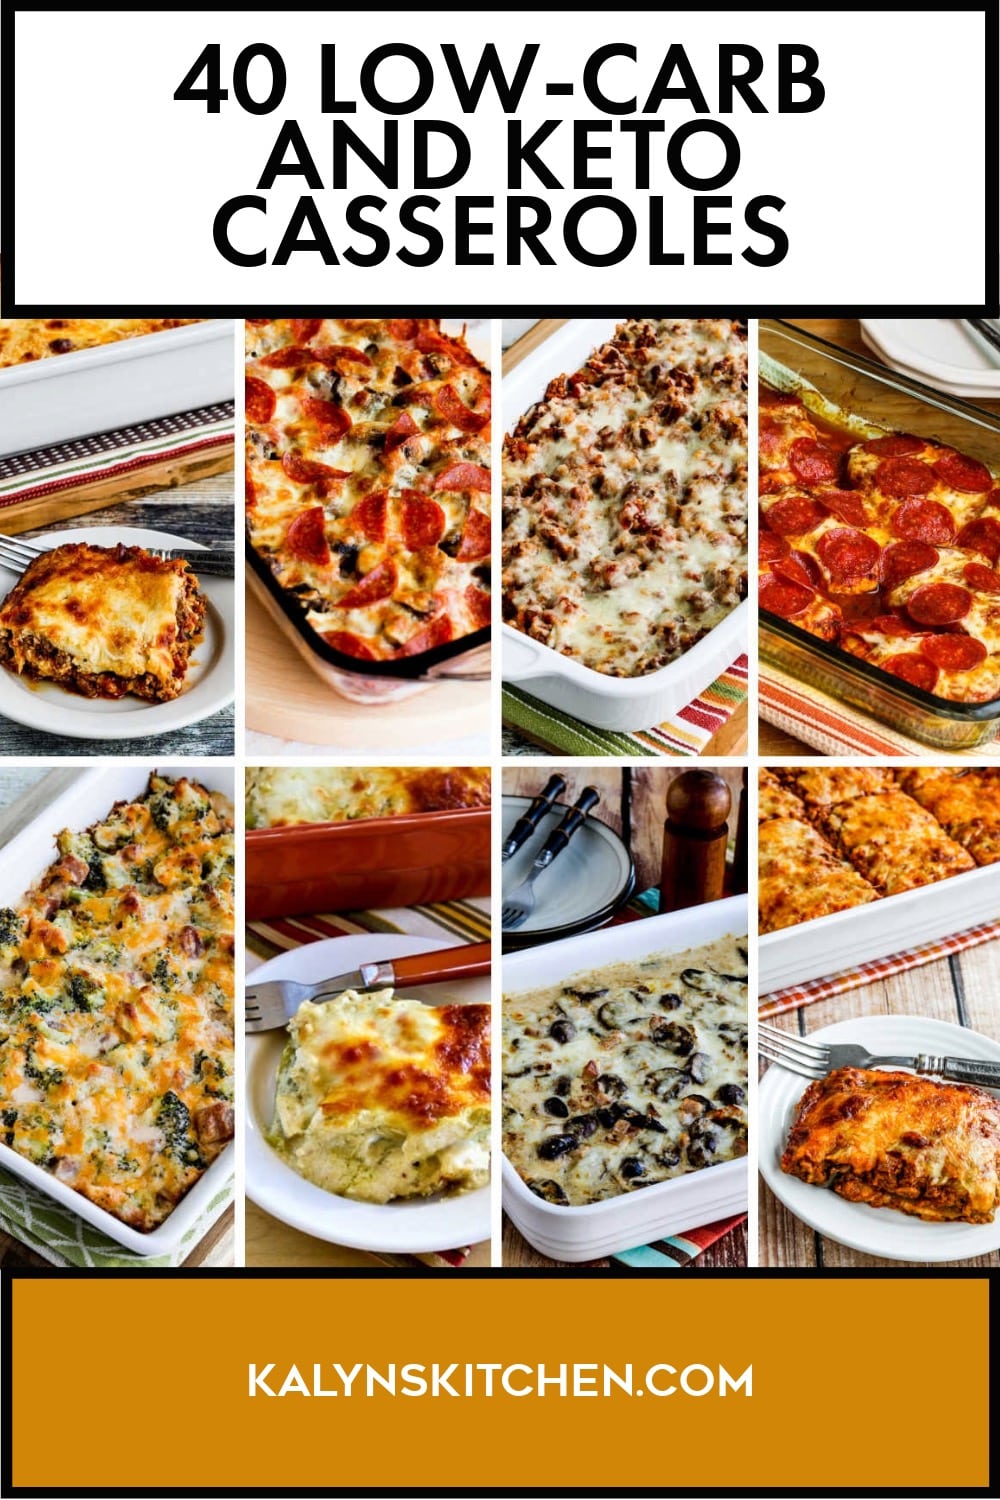 Pinterest image of 40 Low-Carb and Keto Casseroles